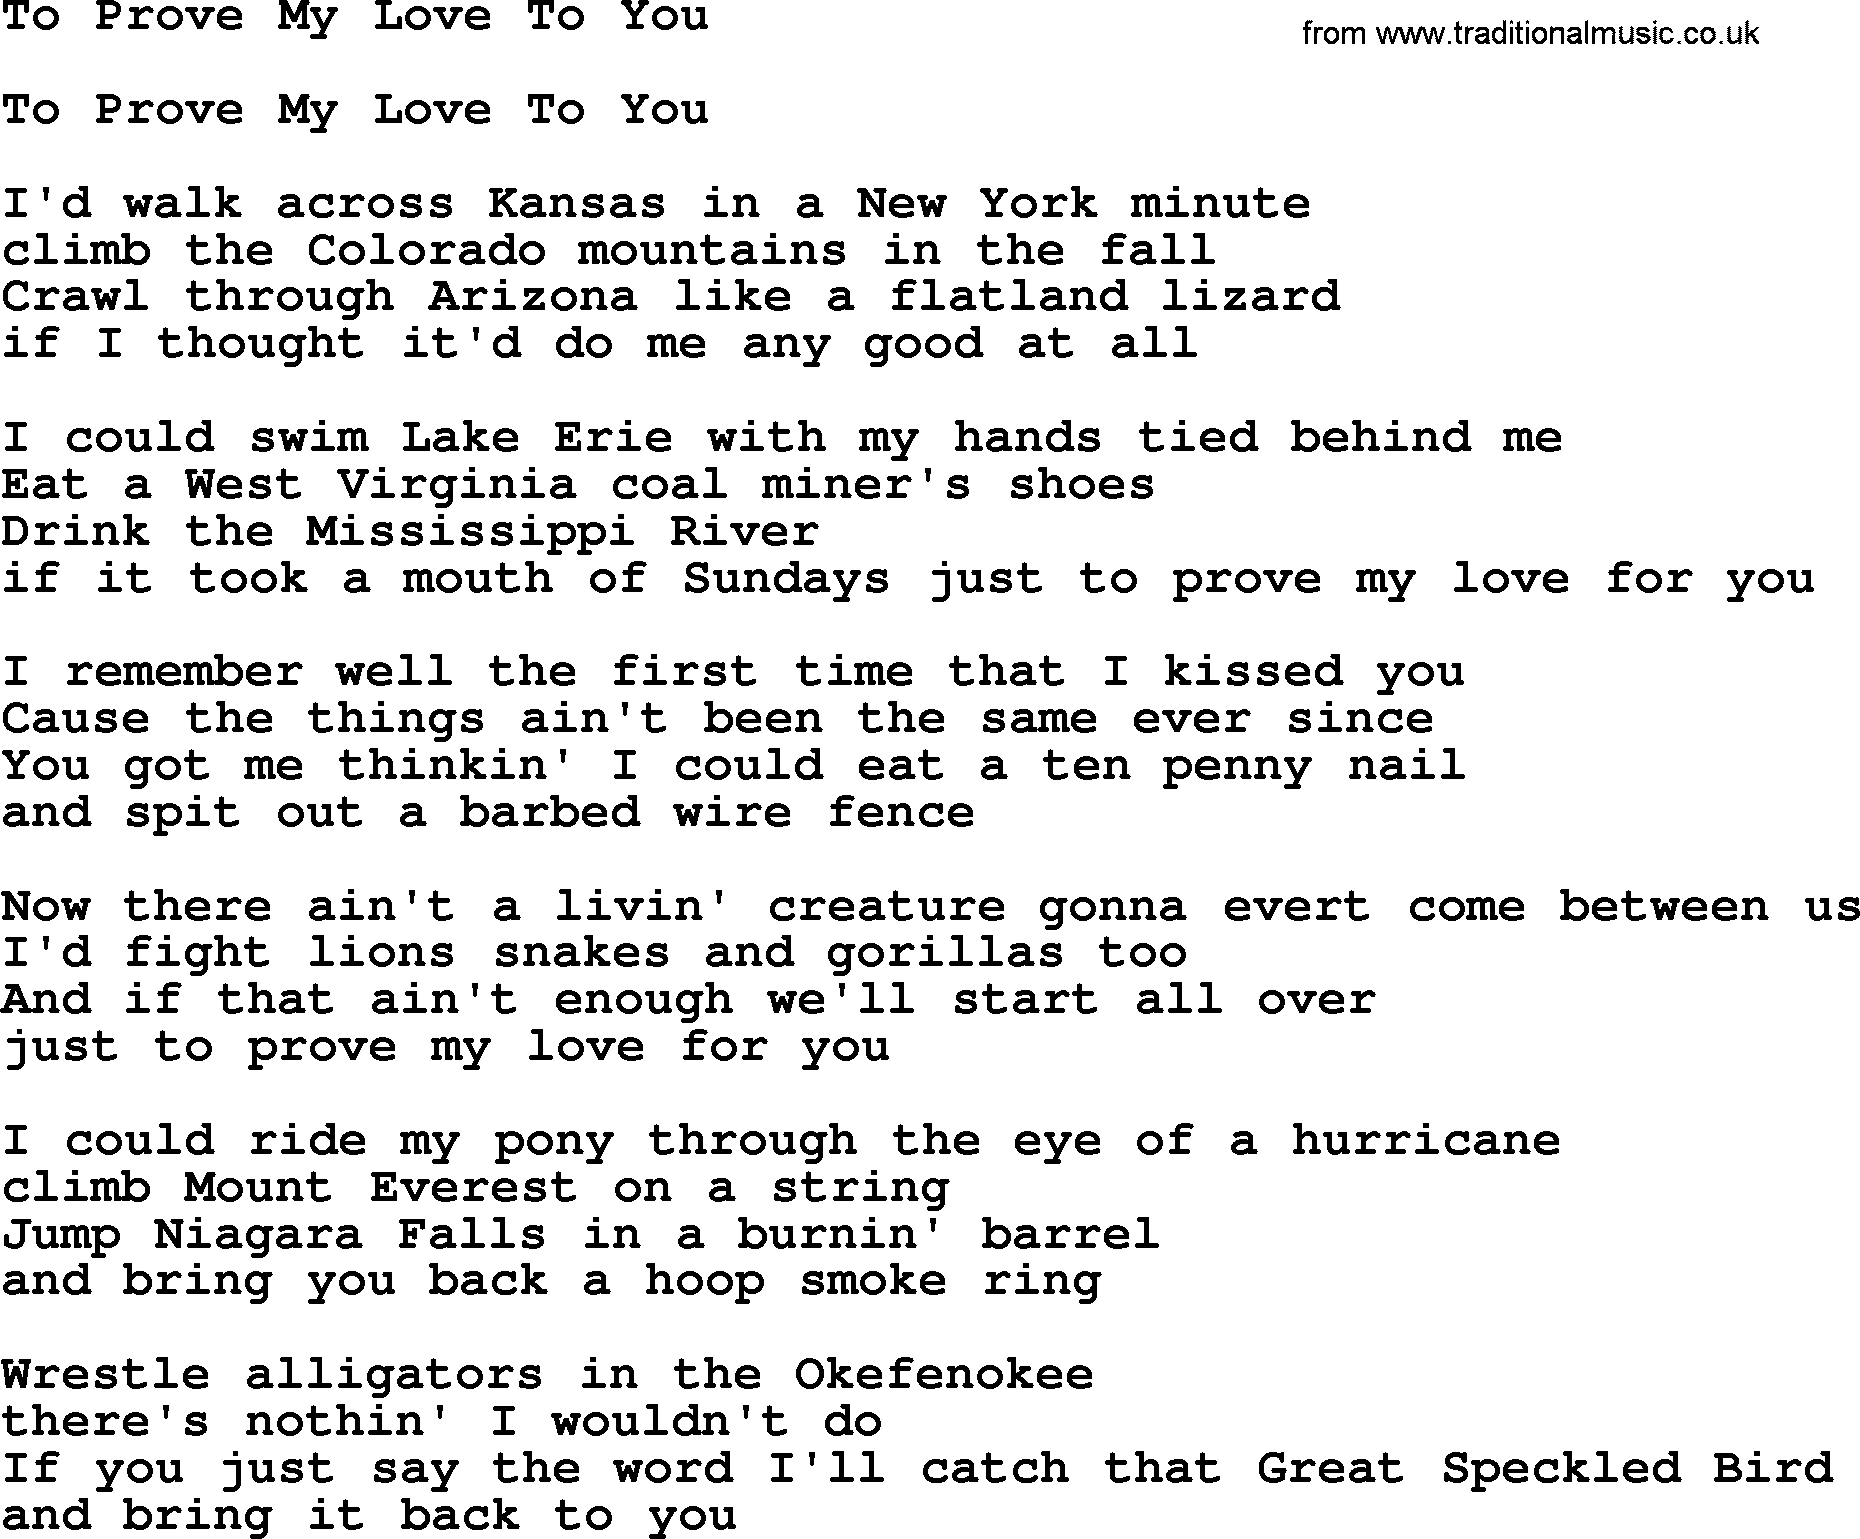 The Byrds song To Prove My Love To You, lyrics